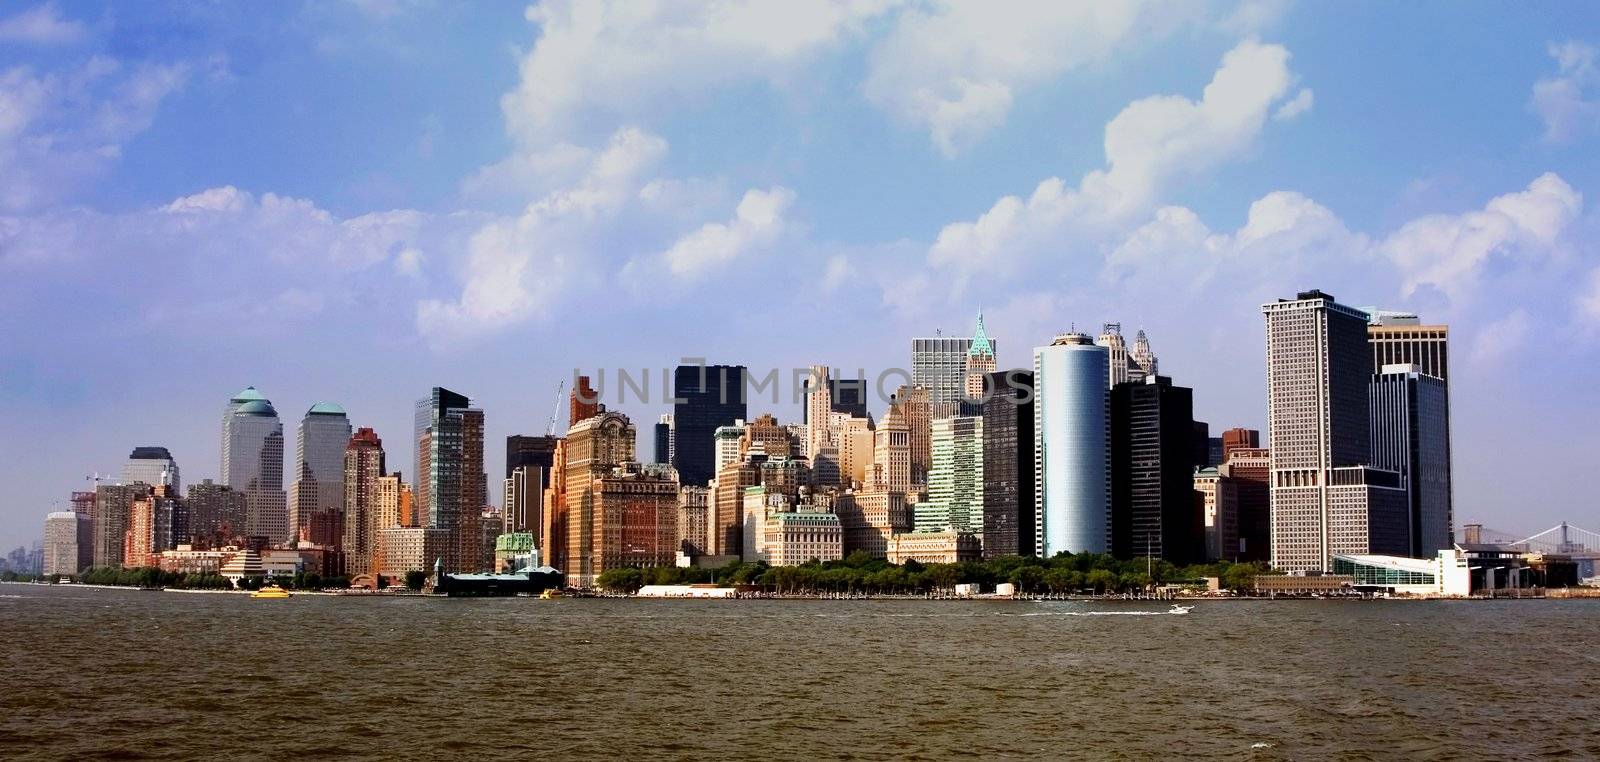 View of the Manhattan skyline as seen from the south. In front one can see Battery Park, with the buildings of New York's financial district.